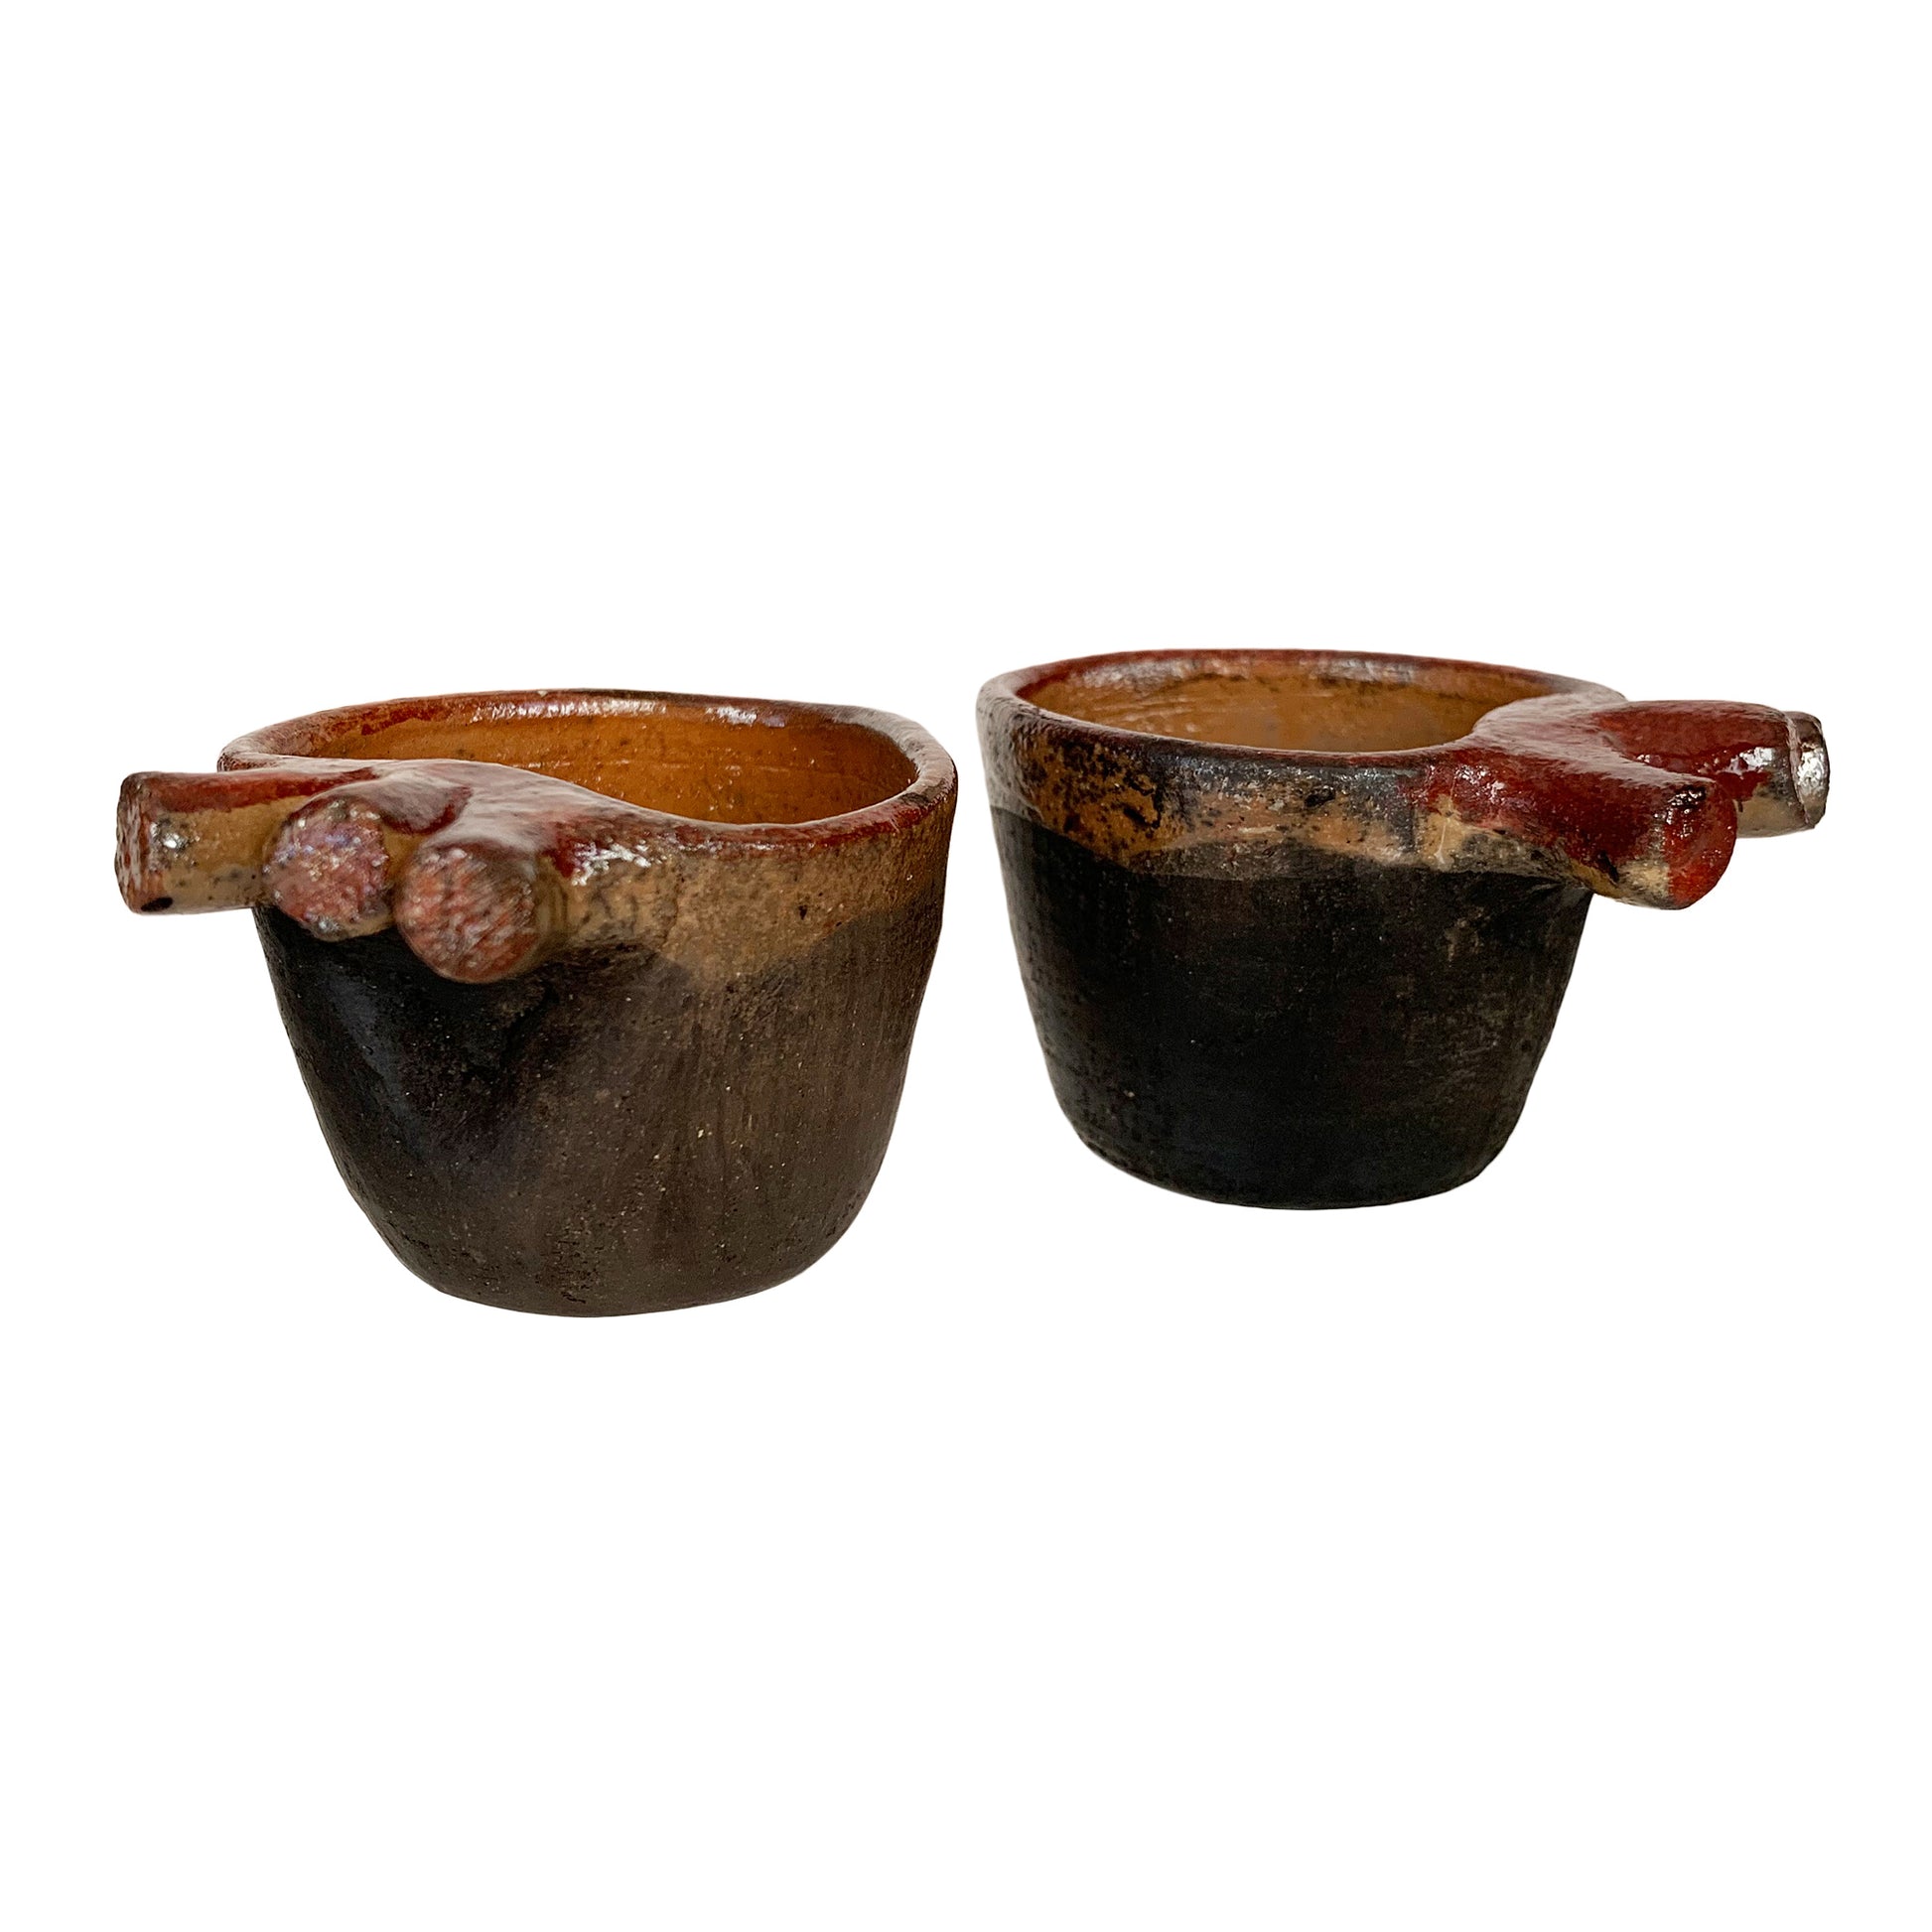 Two traditional jicama cups for drinking mezcal in Mexico, on their  rodete stands. Cups made from